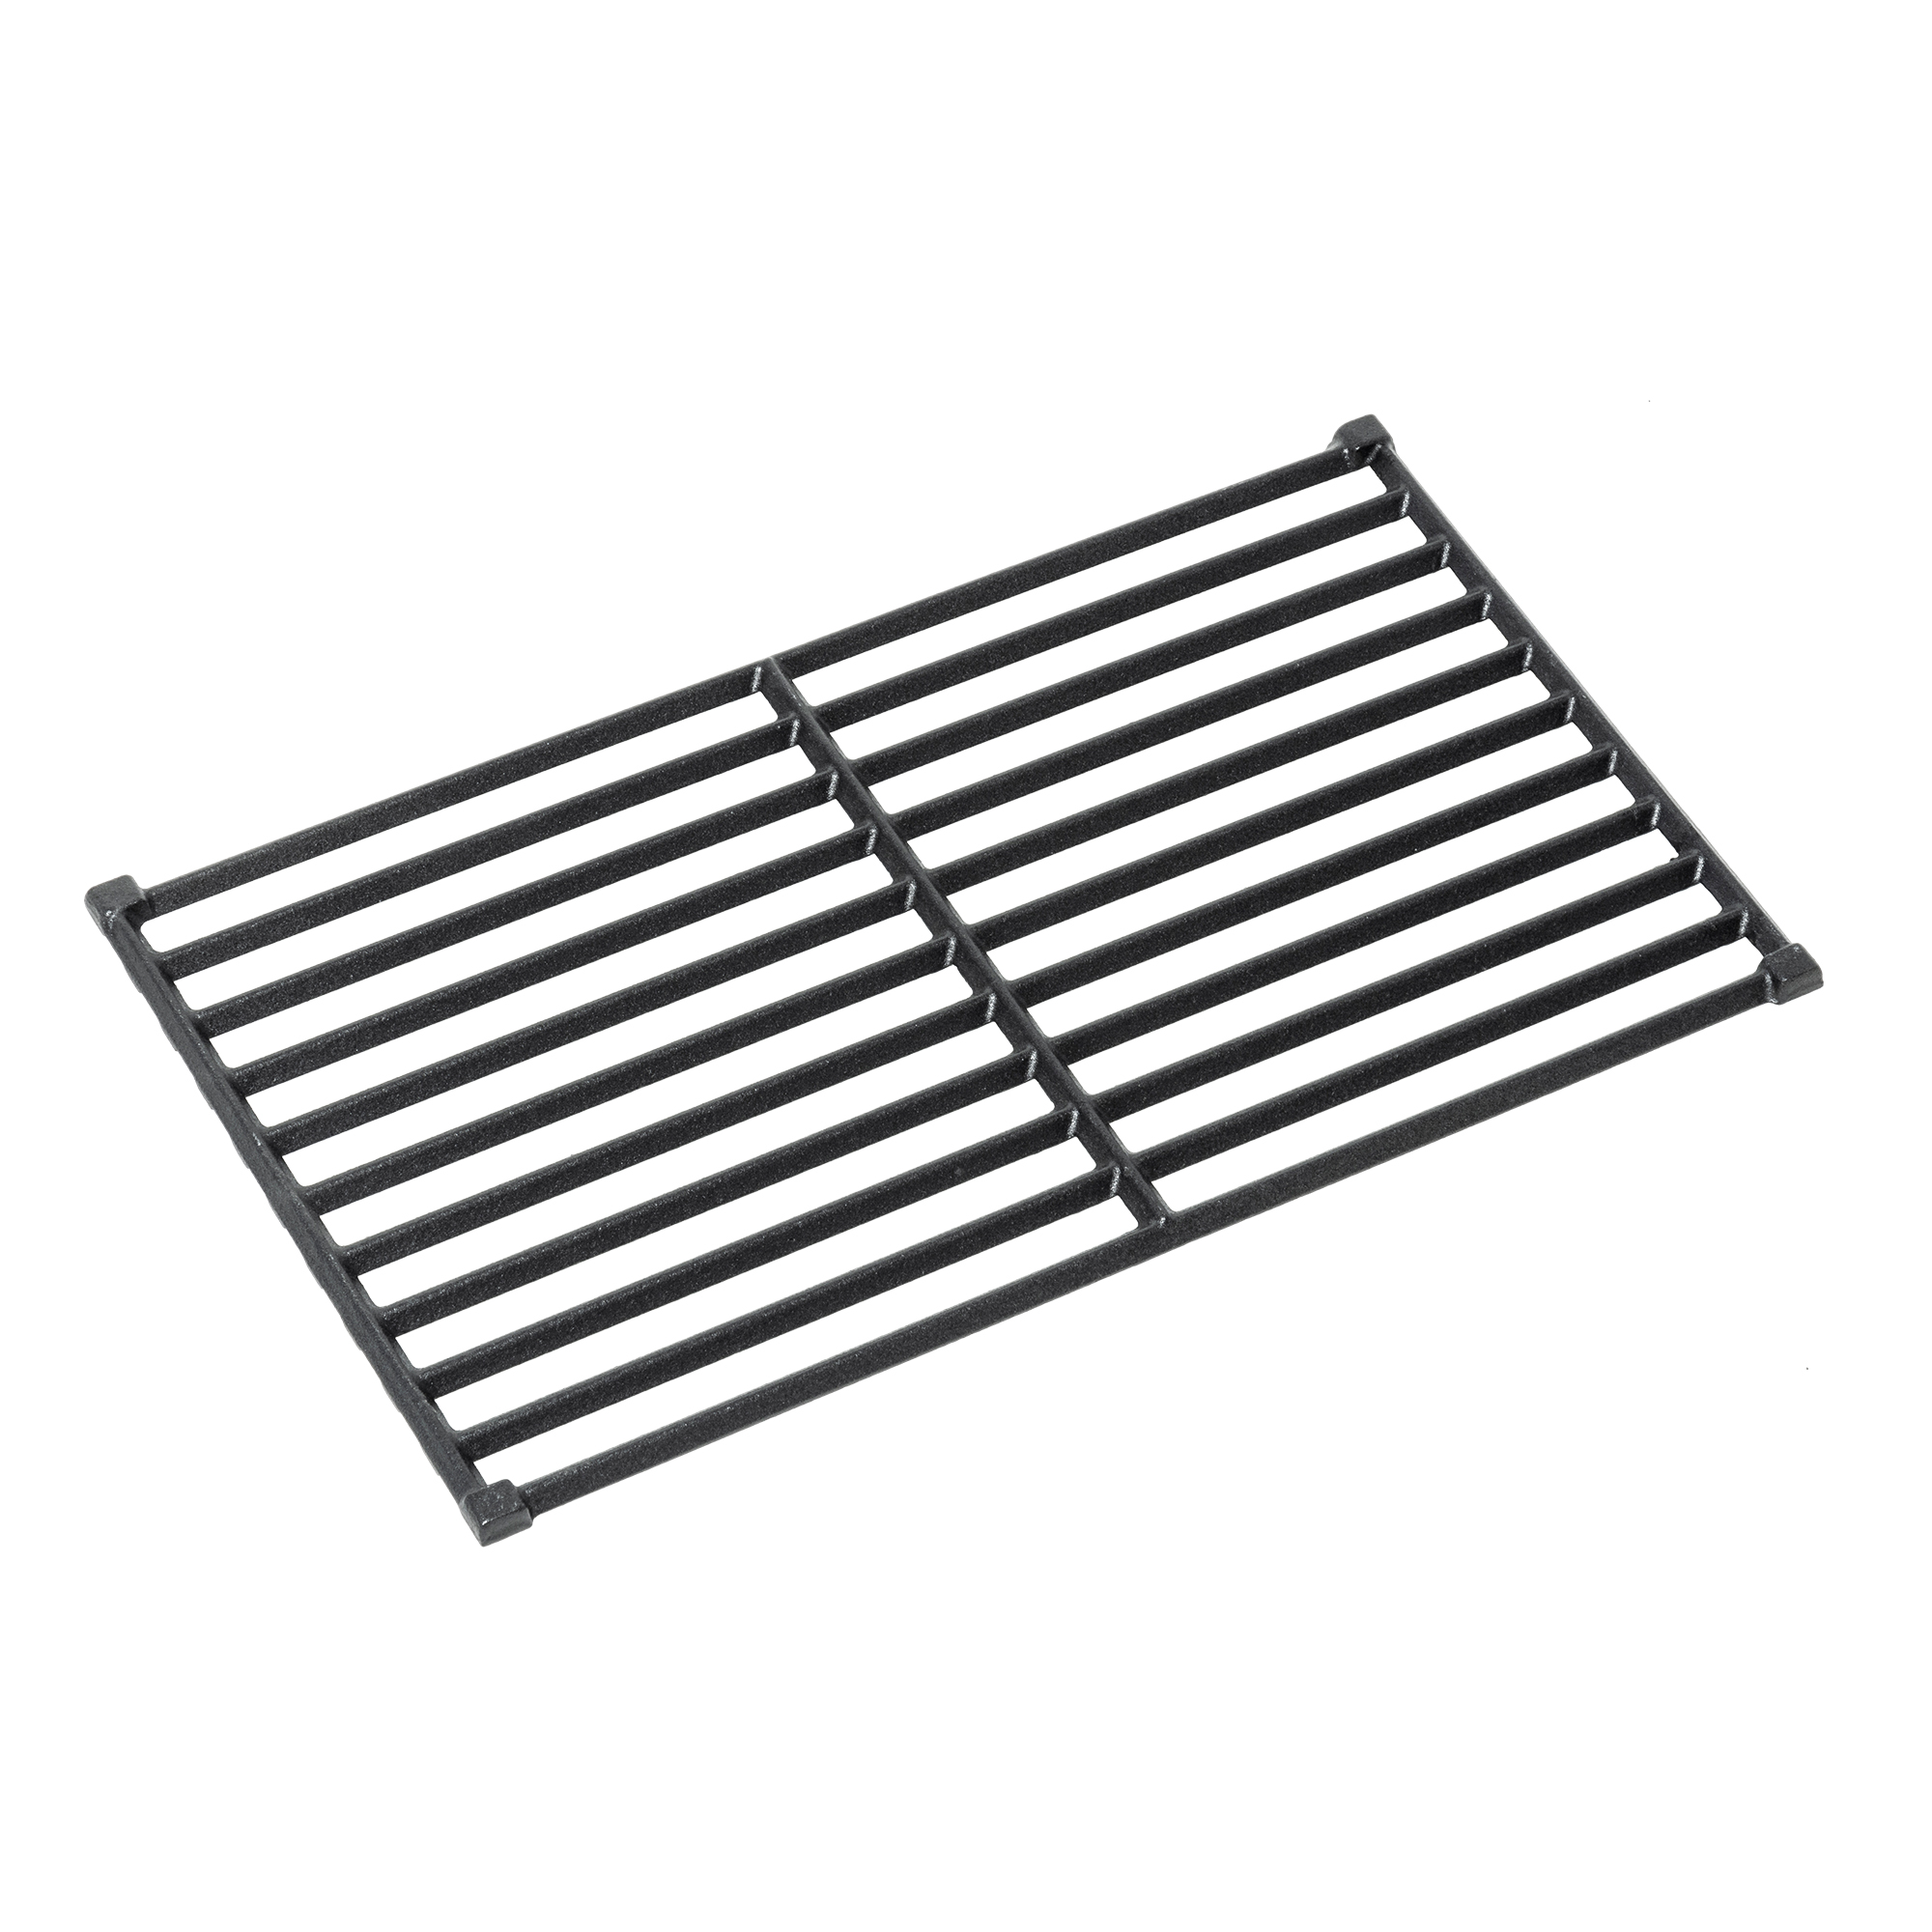 Grilling Grate large Artiso G2/G3 cast iron 24 x 41,5 cm